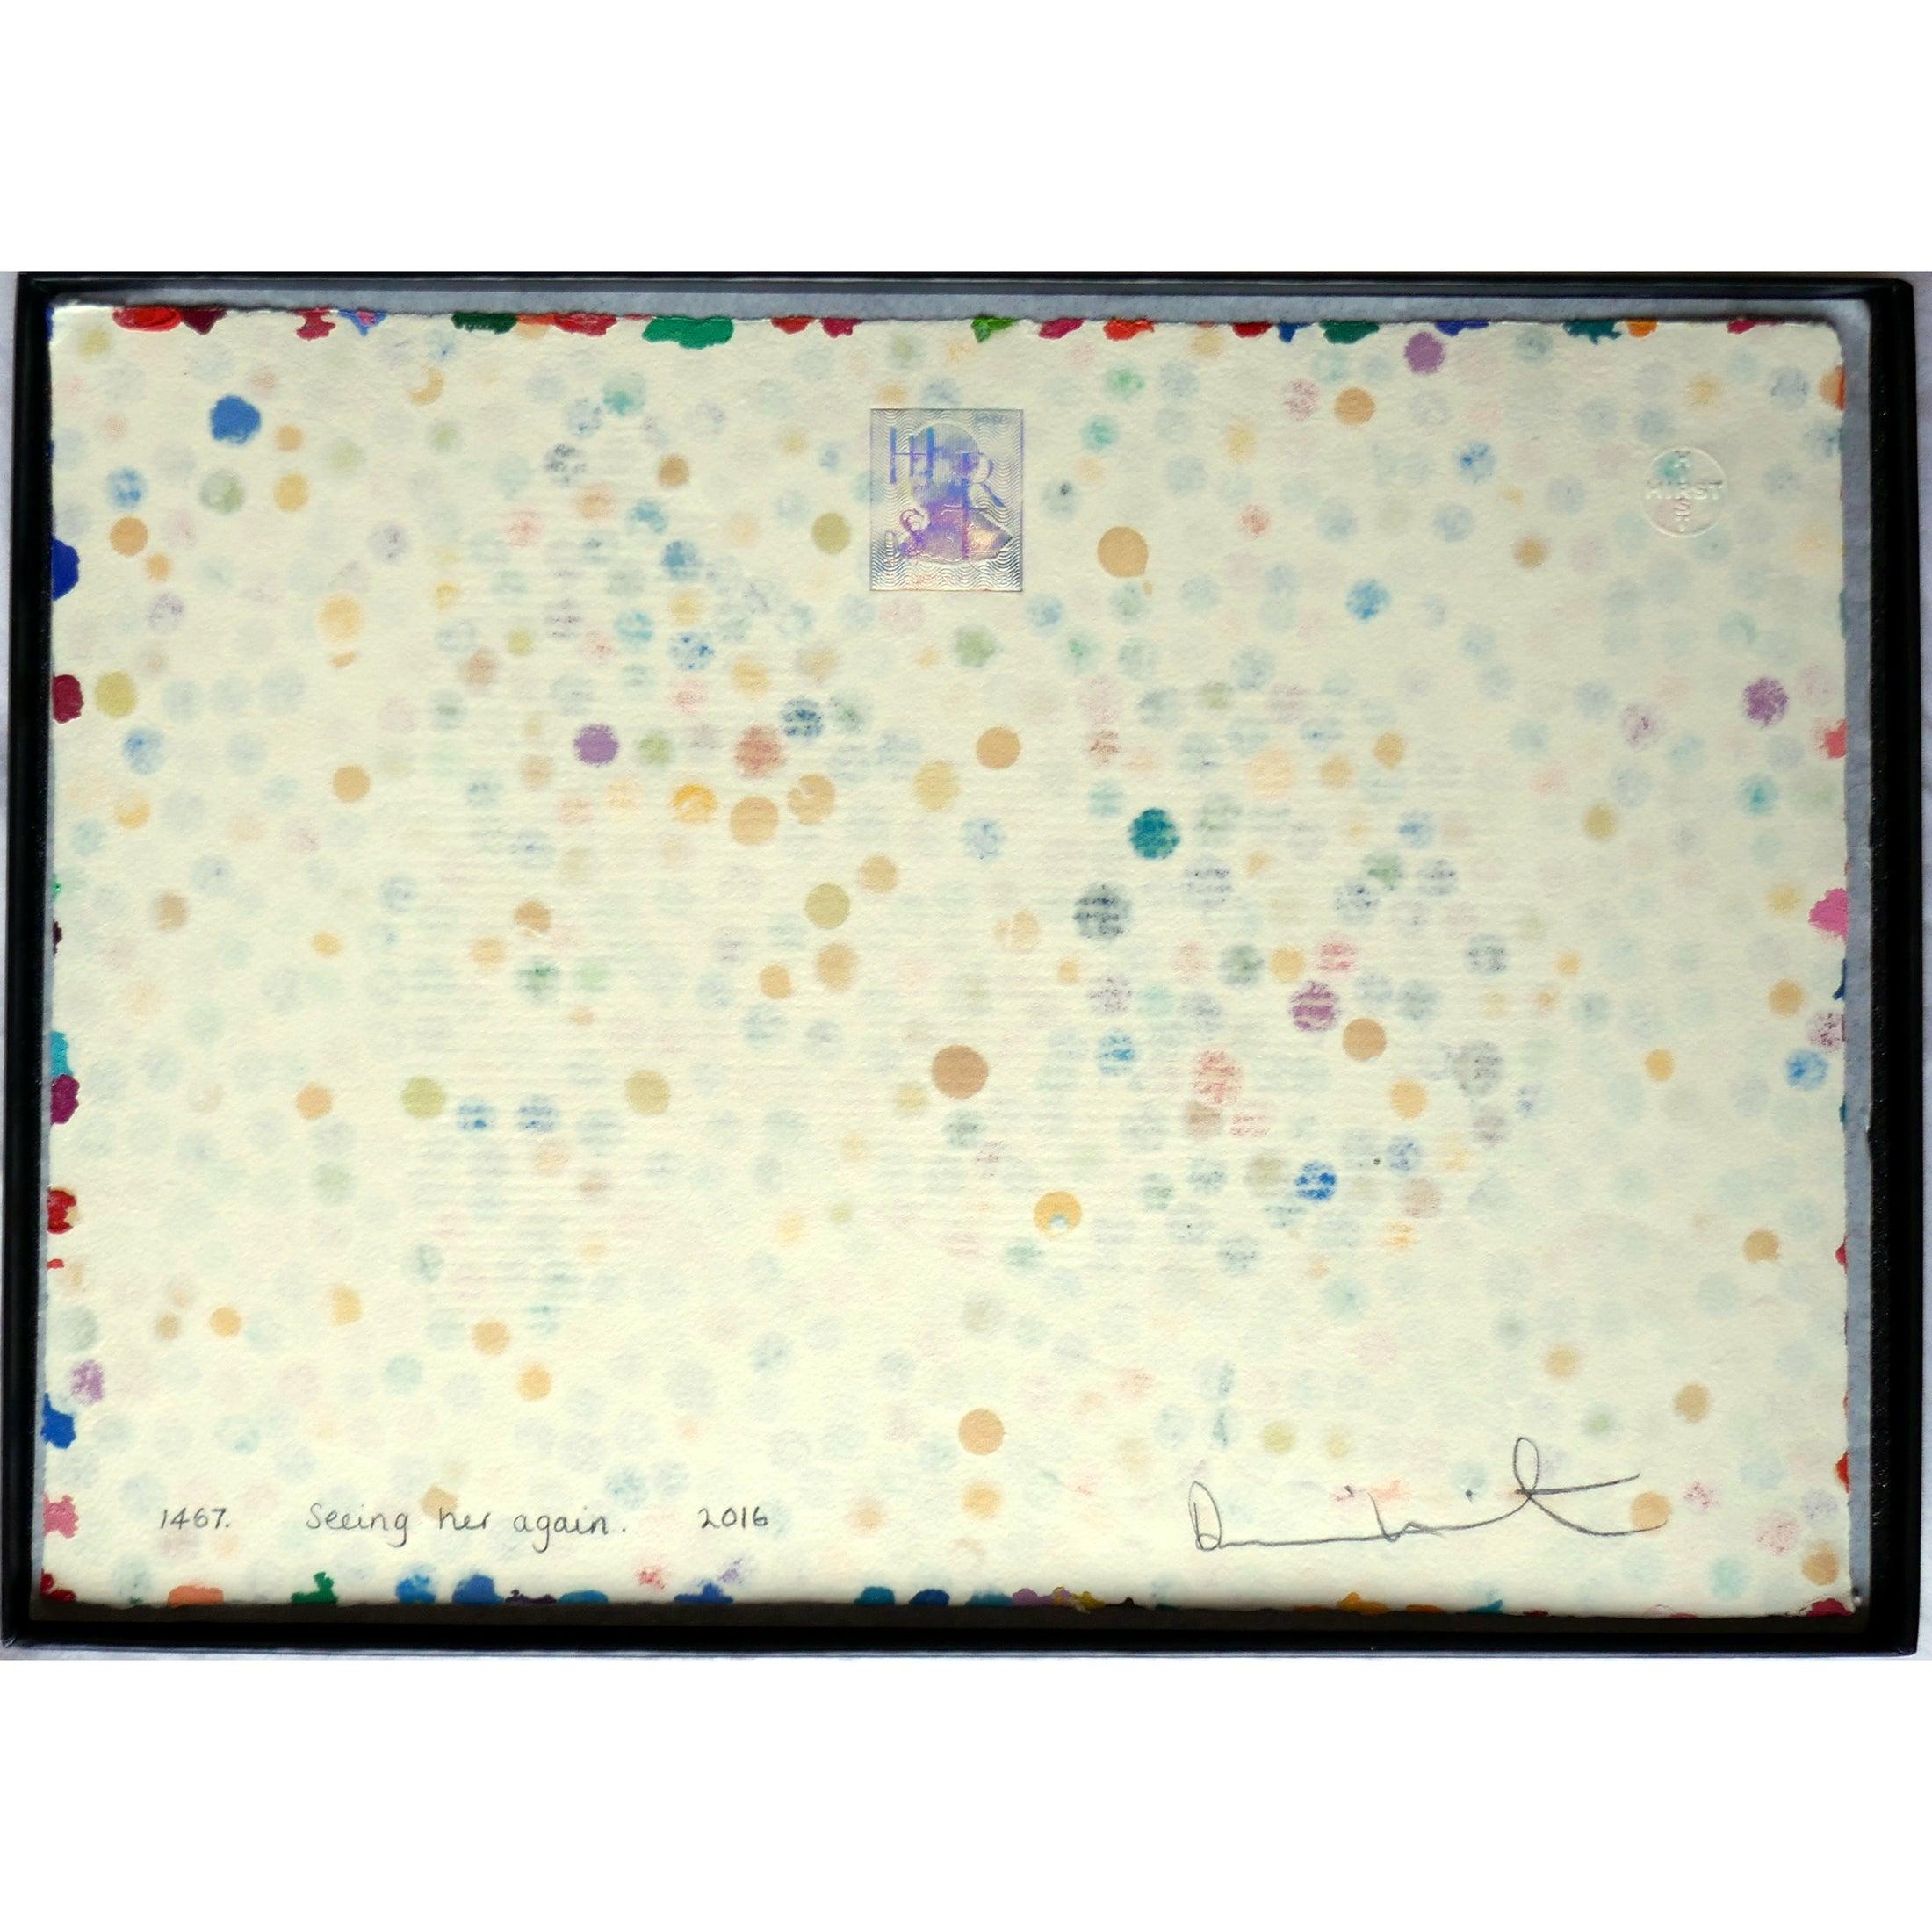 'Seeing Her Again' (The Currency) - 1467 - Print by Damien Hirst